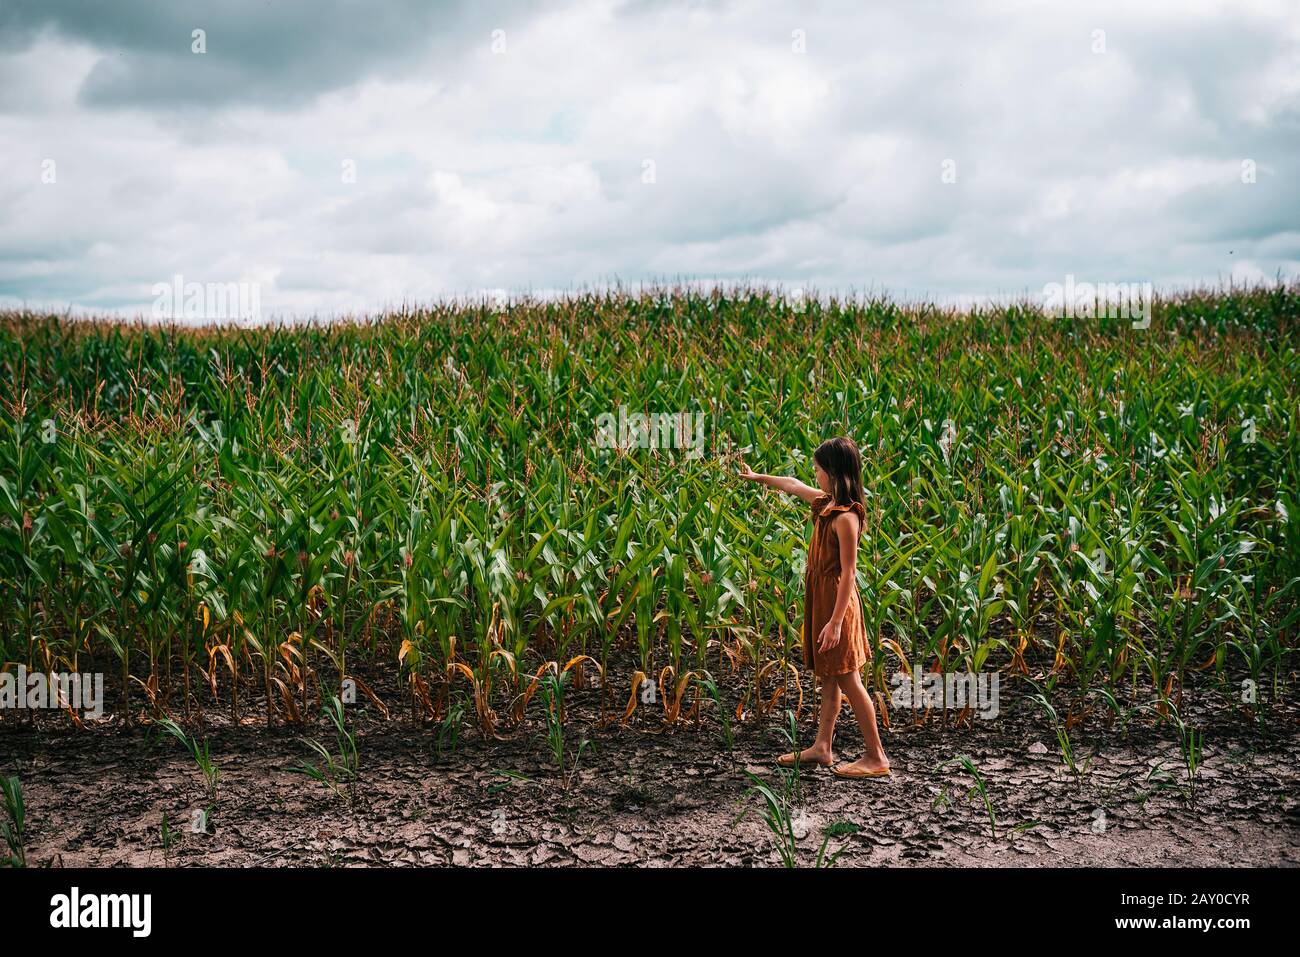 Portrait of a girl in a corn field touching a plant, USA Stock Photo